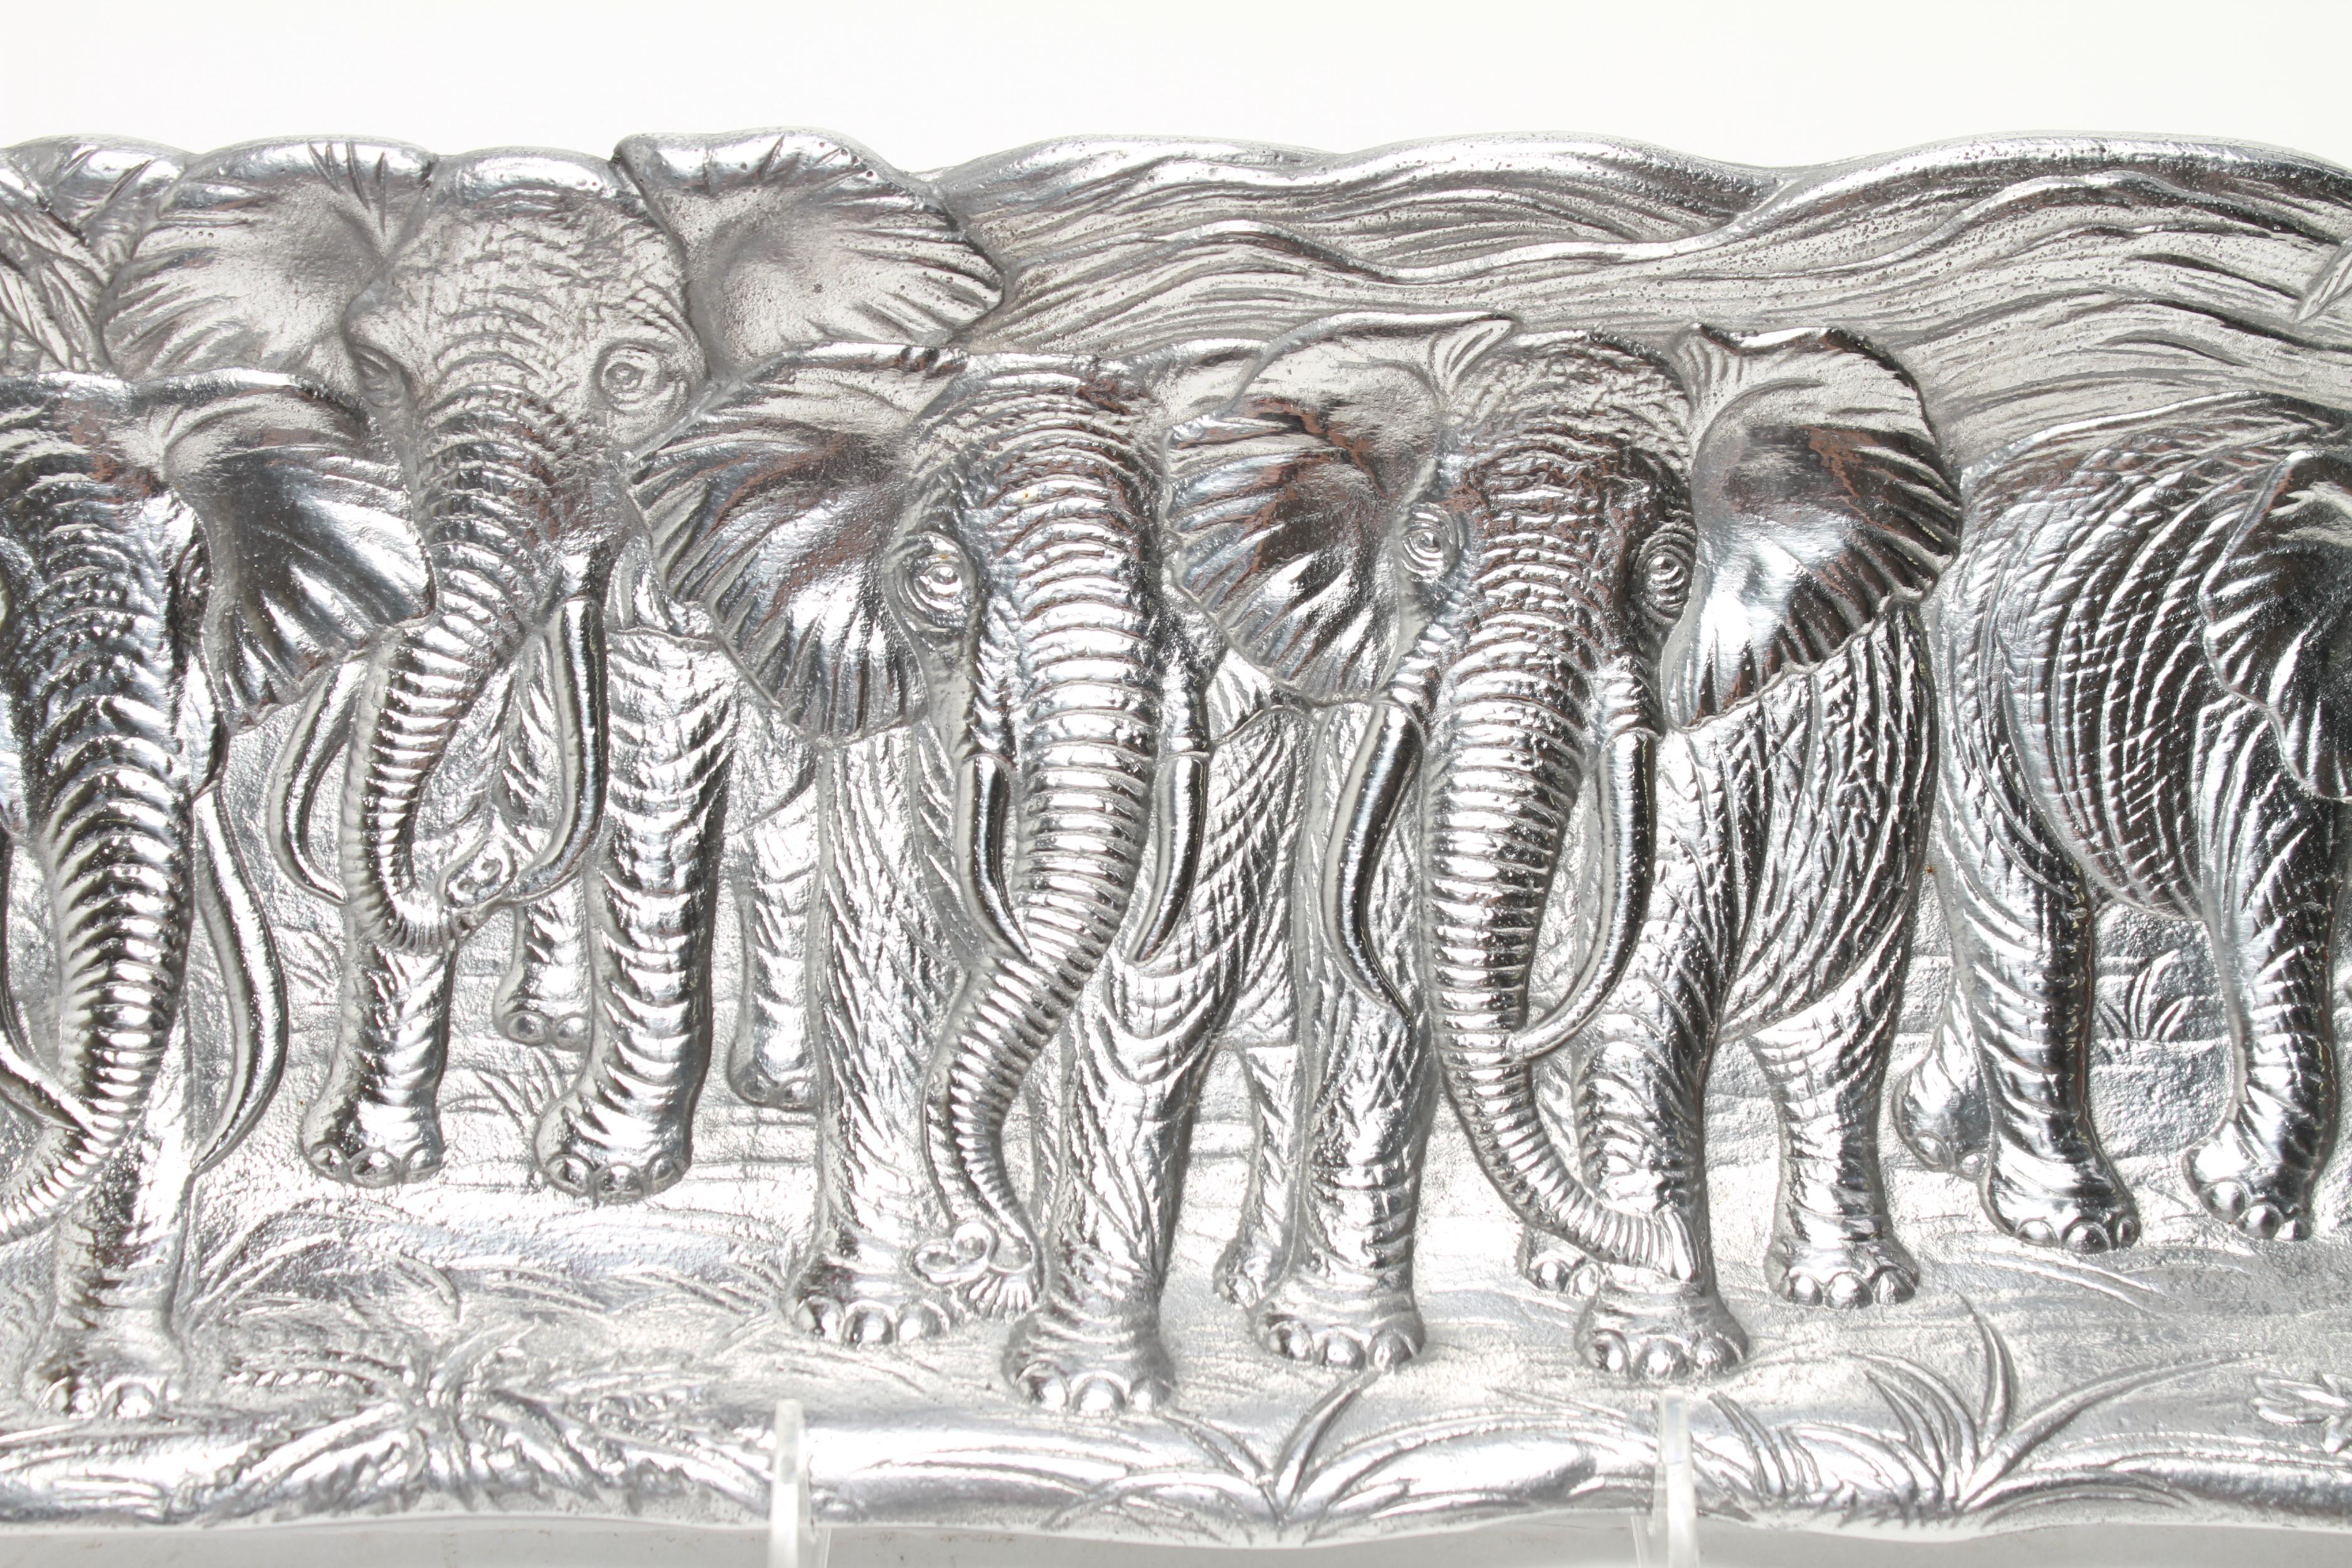 Arthur Court Postmodern elephant aluminum serving tray in oblong shape, with incised decoration of various elephants. The piece has a maker's mark and is dated 1986 underneath. In great vintage condition with age-appropriate wear.